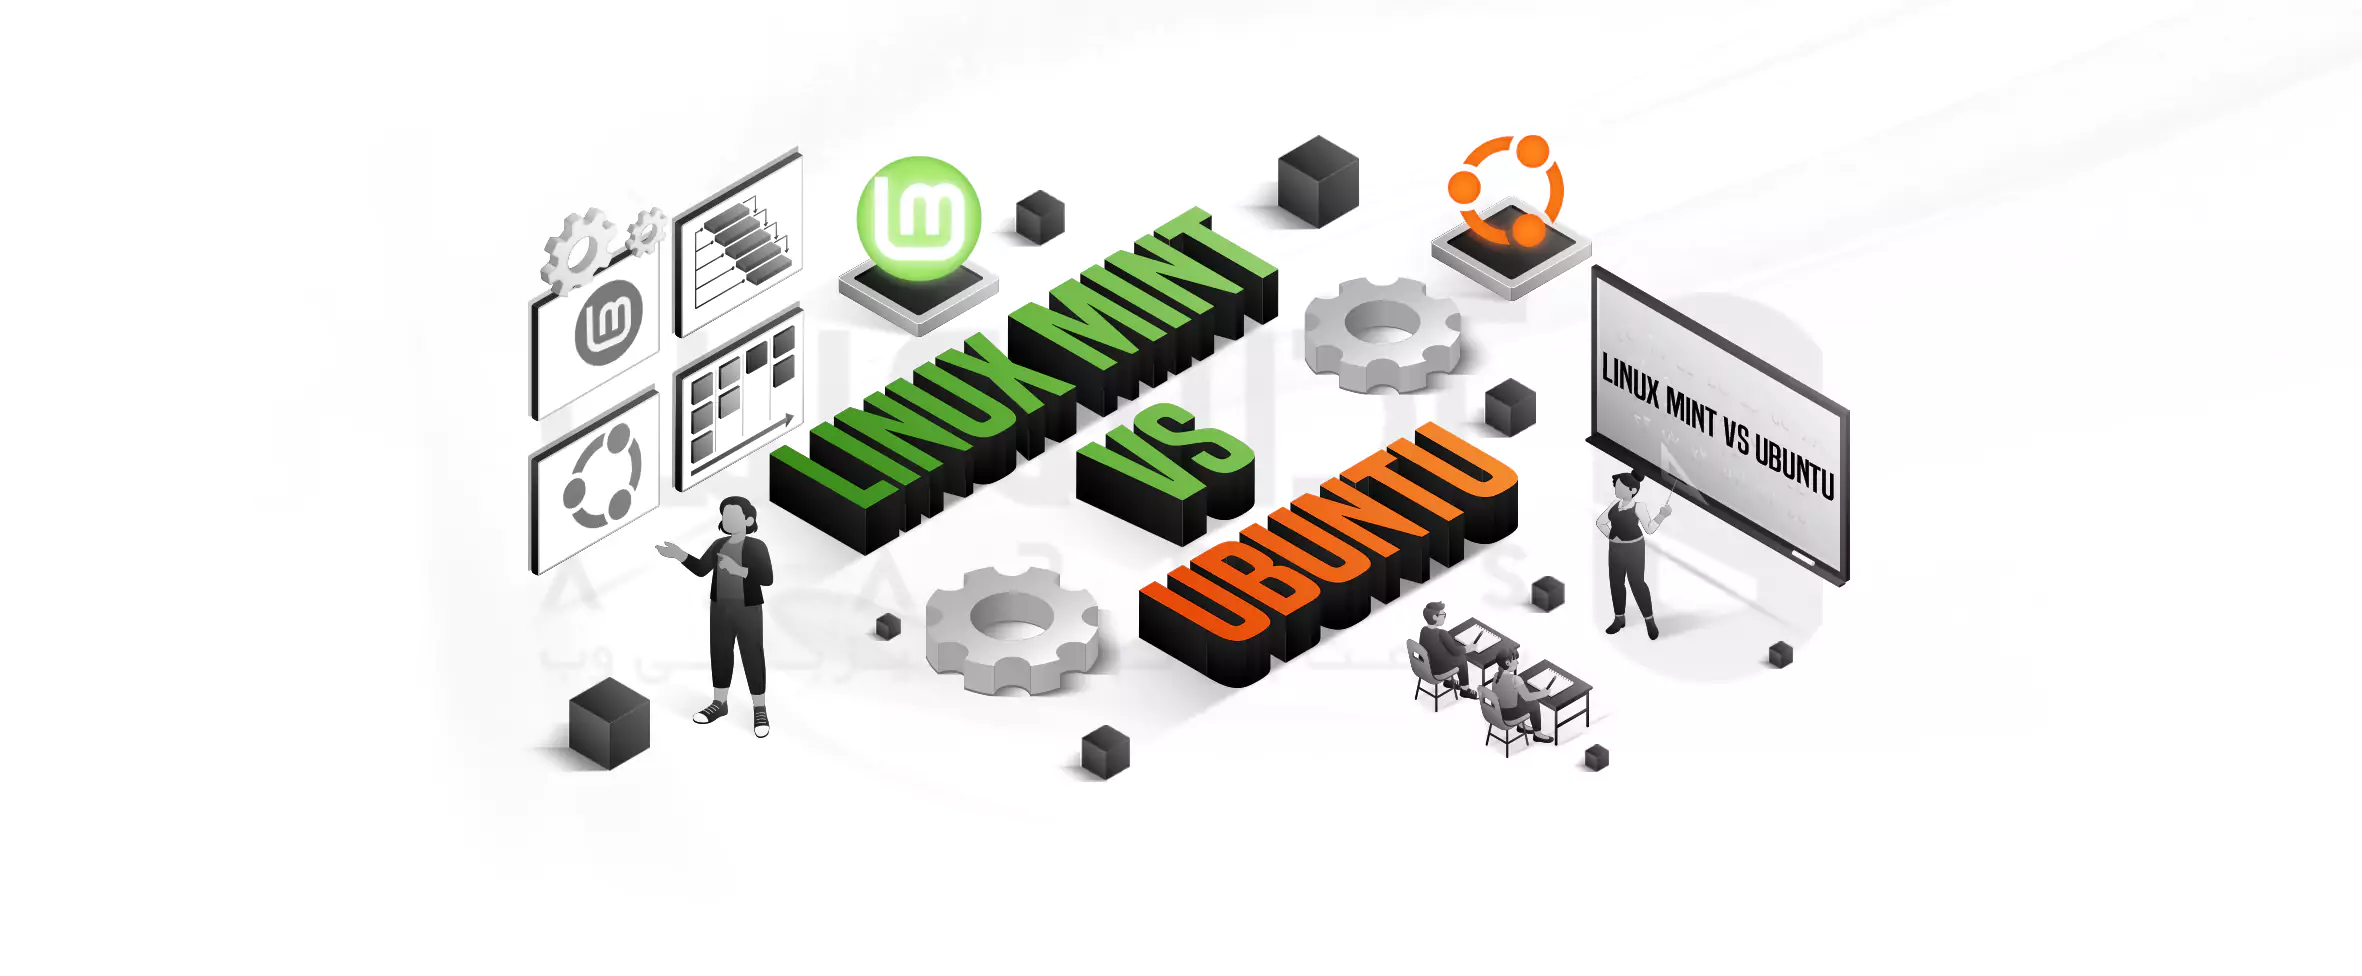 Linux Mint and Ubuntu case Which operating system is better for beginners